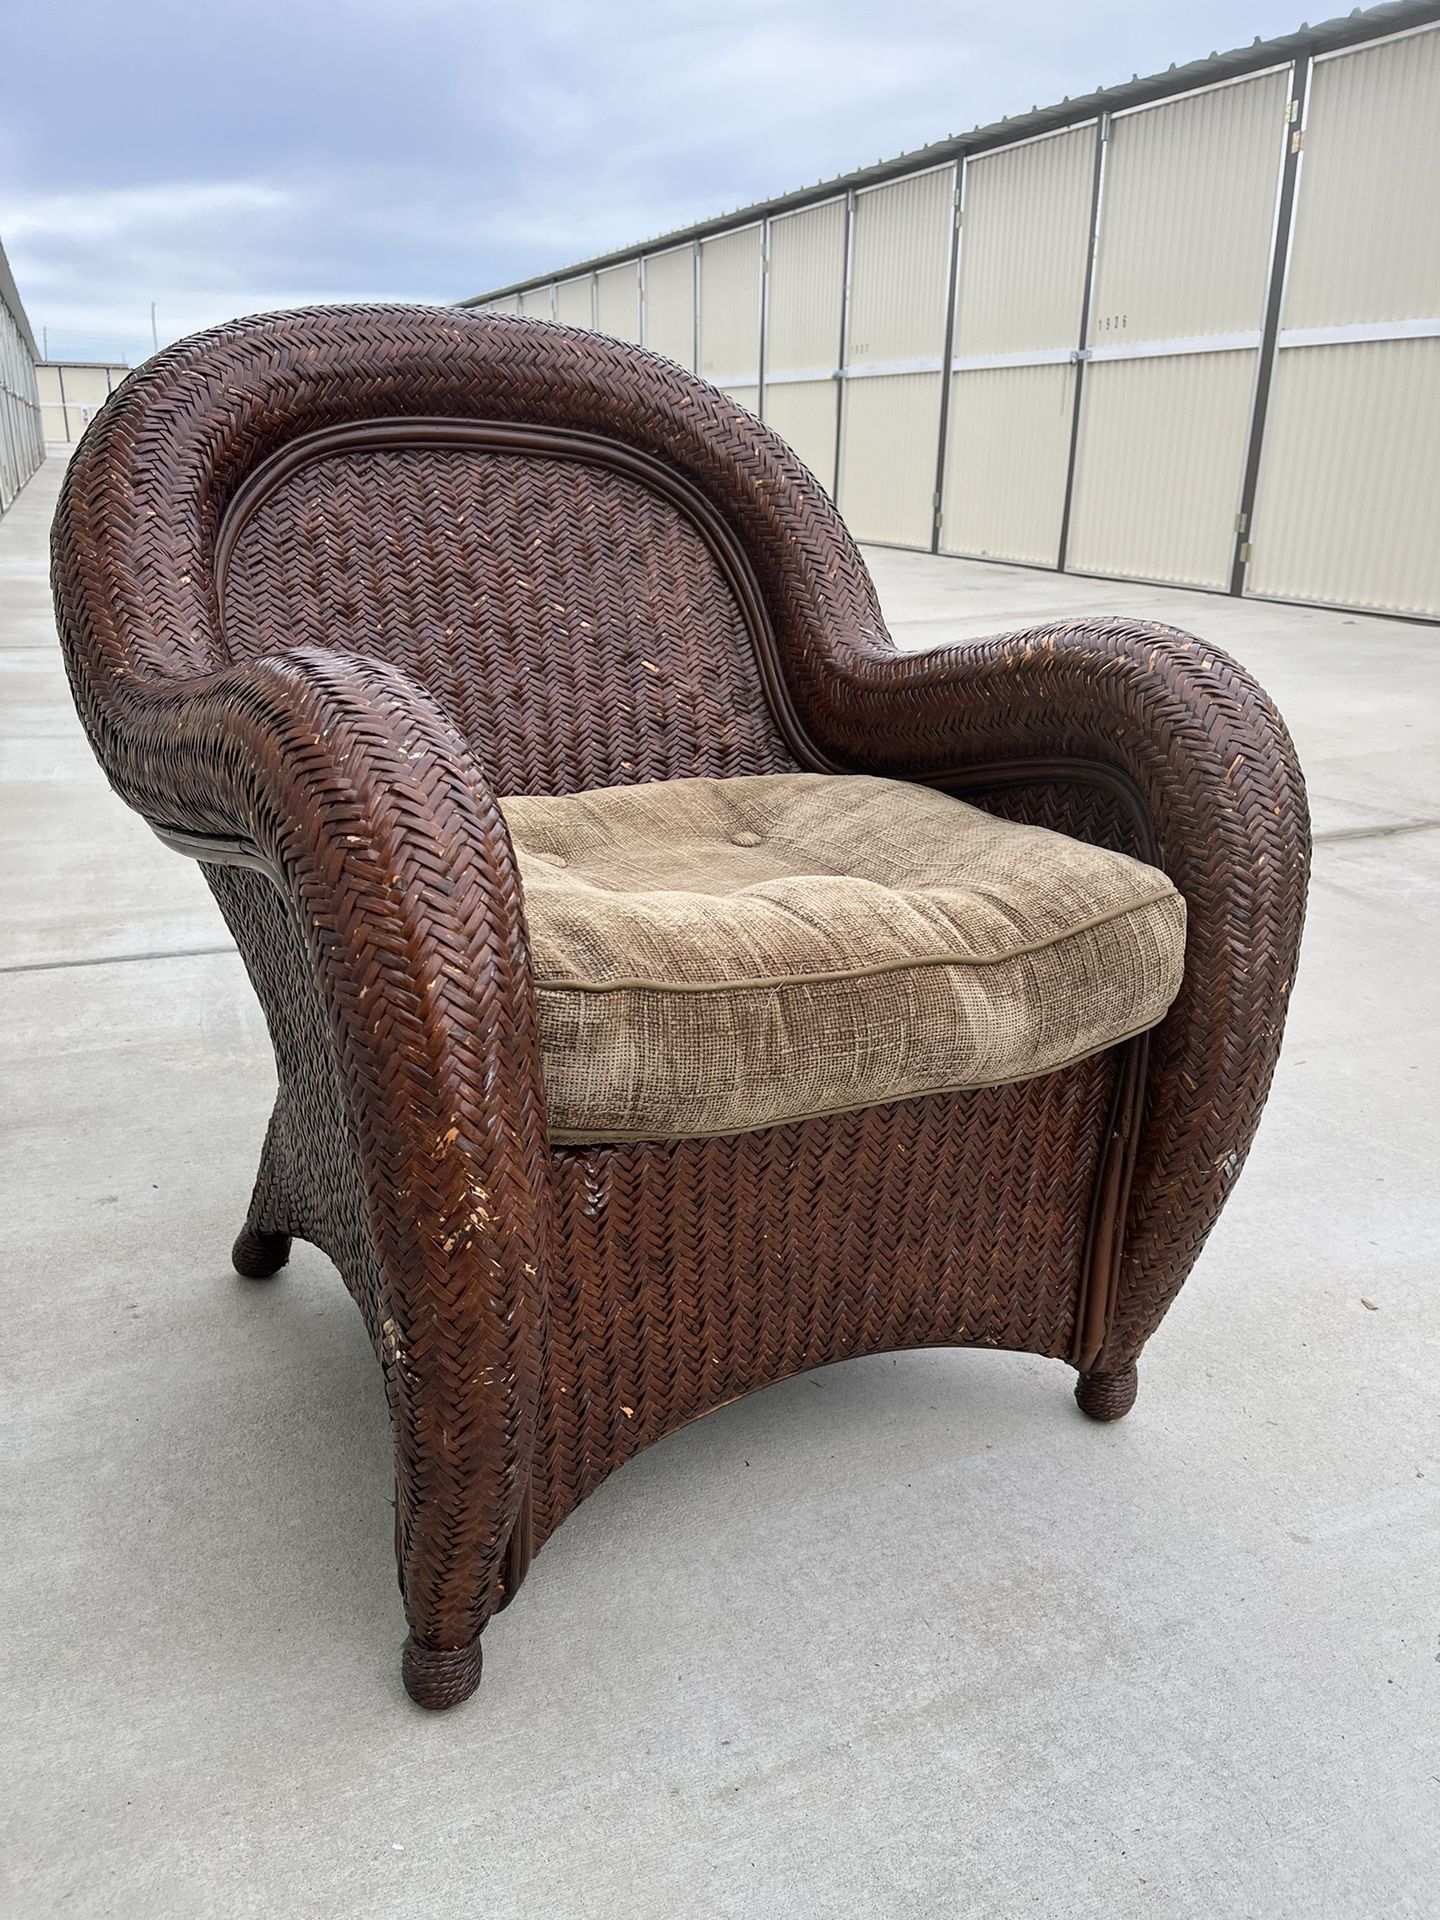 Large Wicker Chair With Cushion